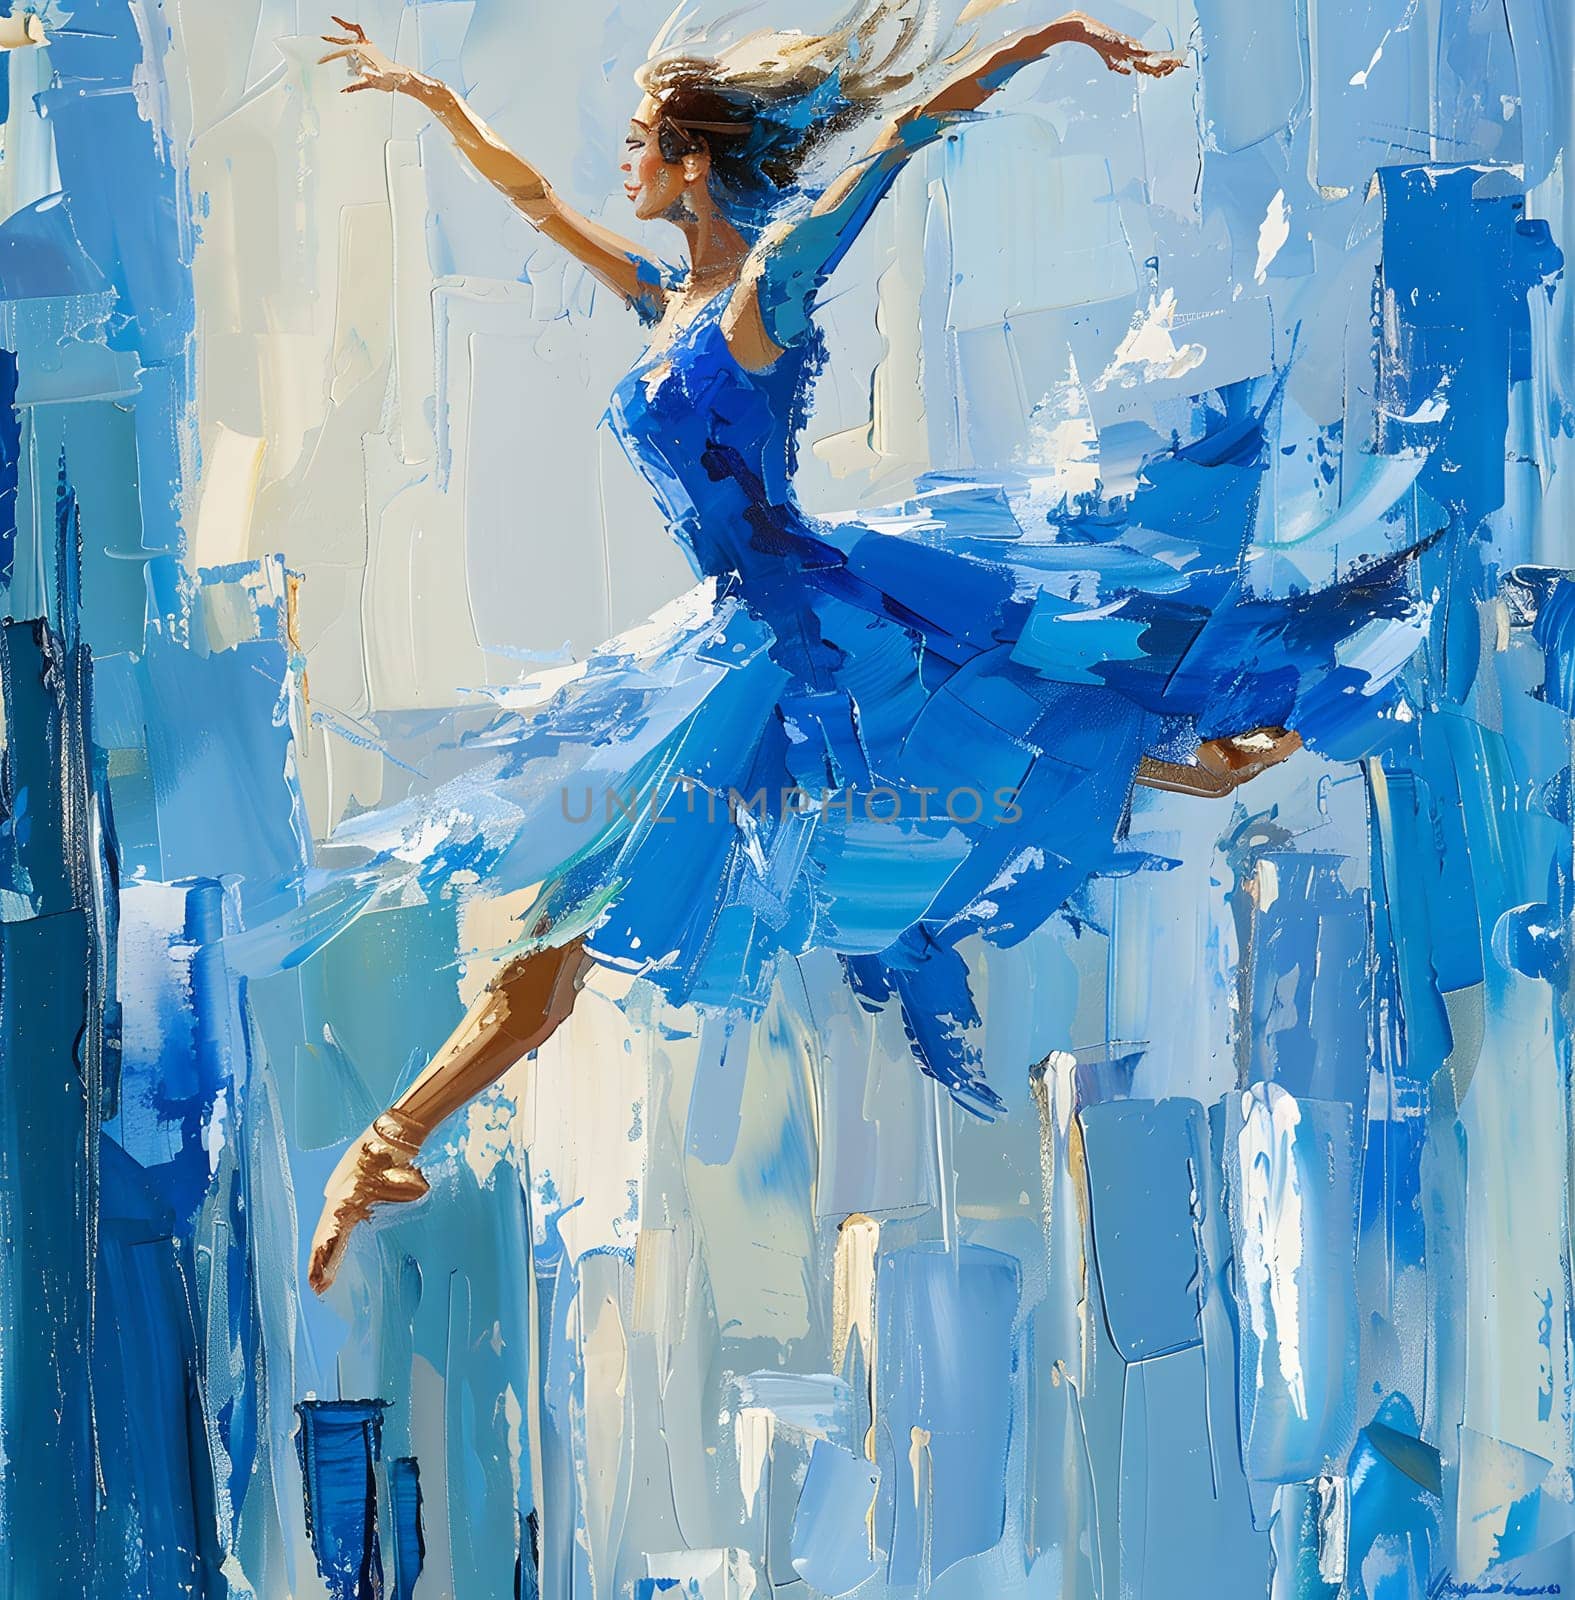 A stunning painting of a ballerina in a flowing blue dress gracefully leaping through the air, captured in beautiful shades of azure and aqua by a talented artist